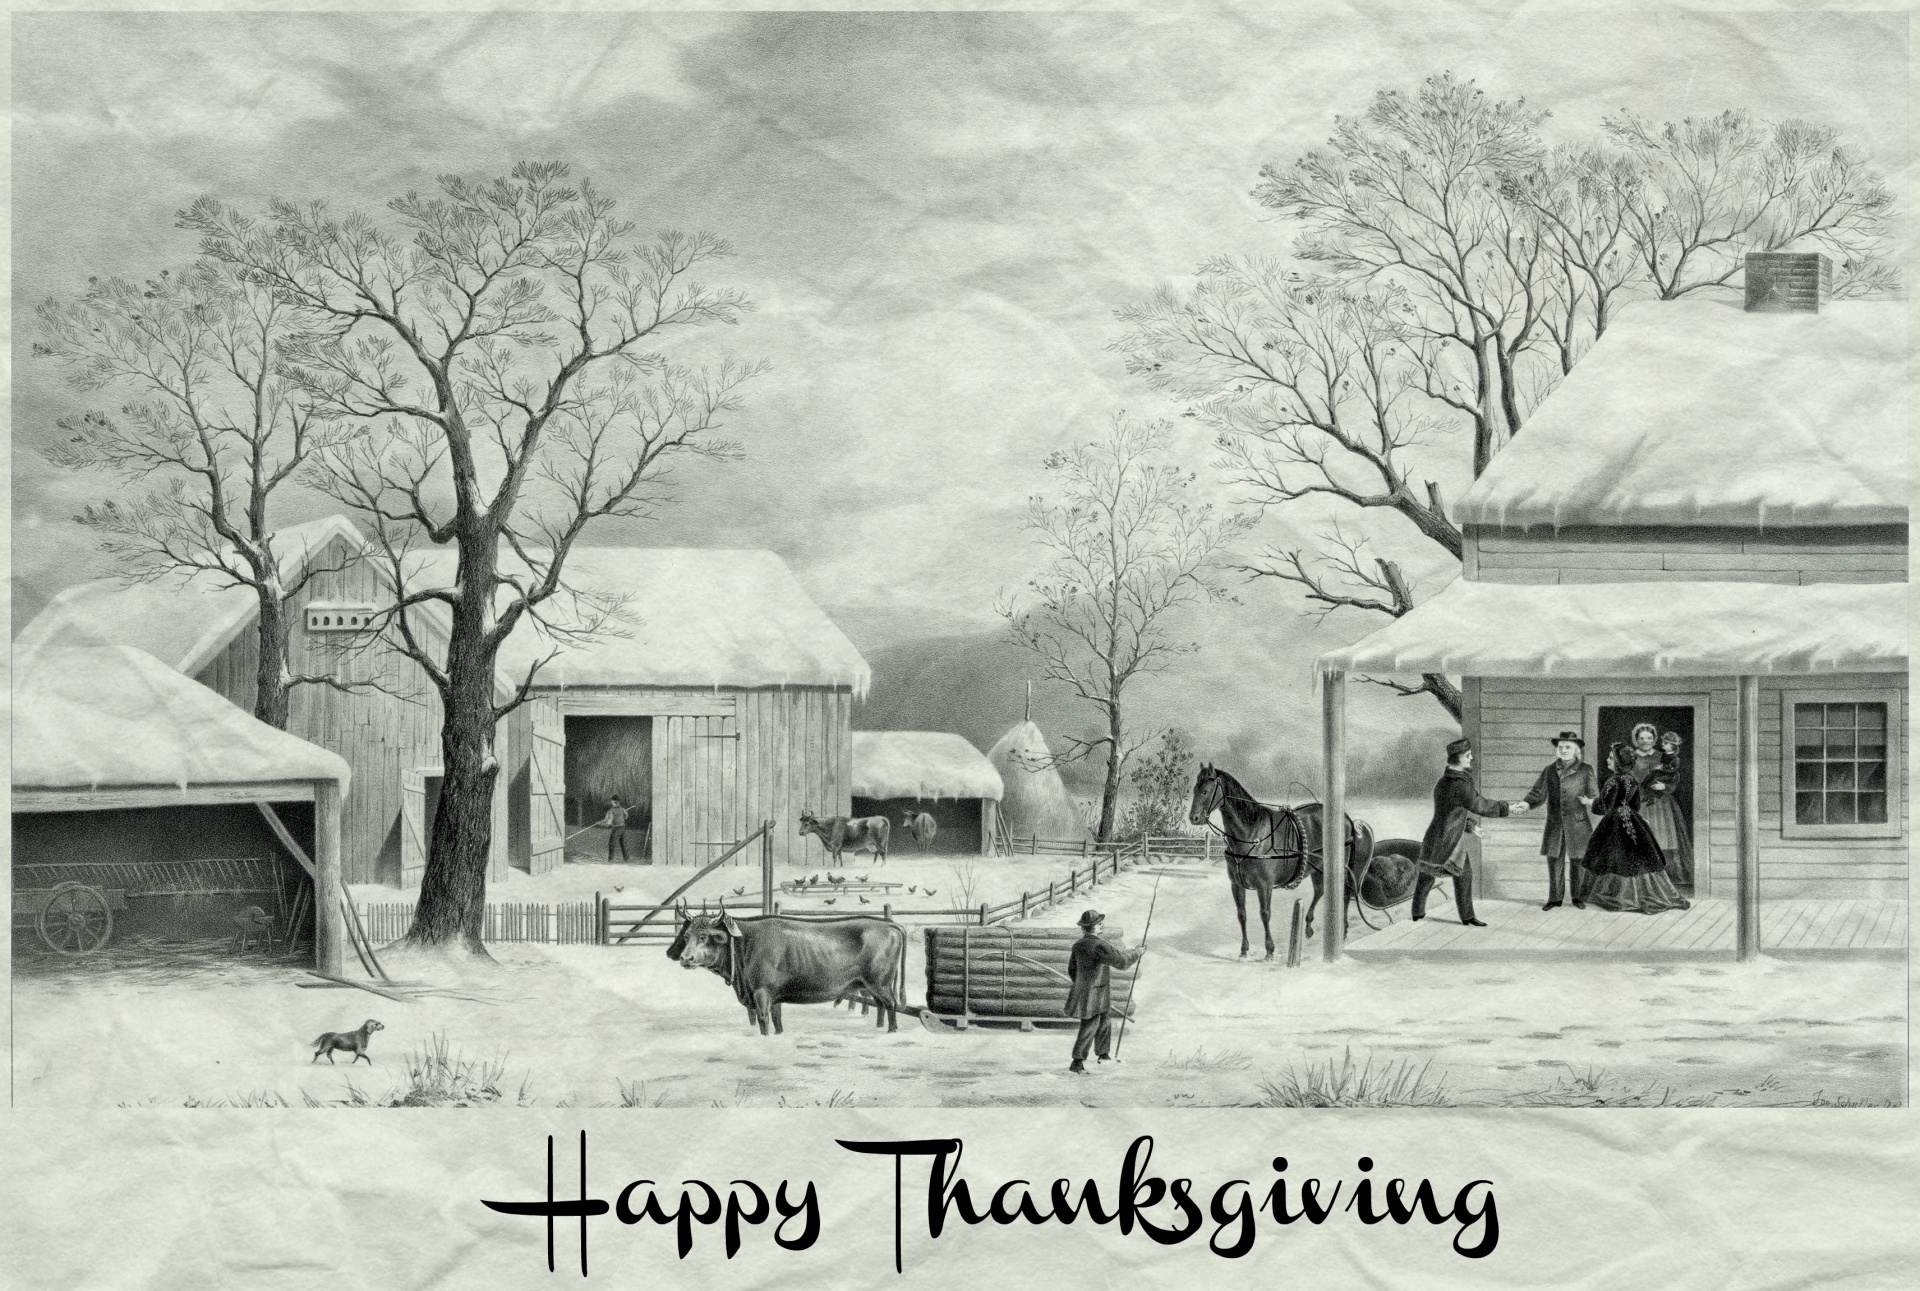 Thanksgiving vintage image from Burl and Ives